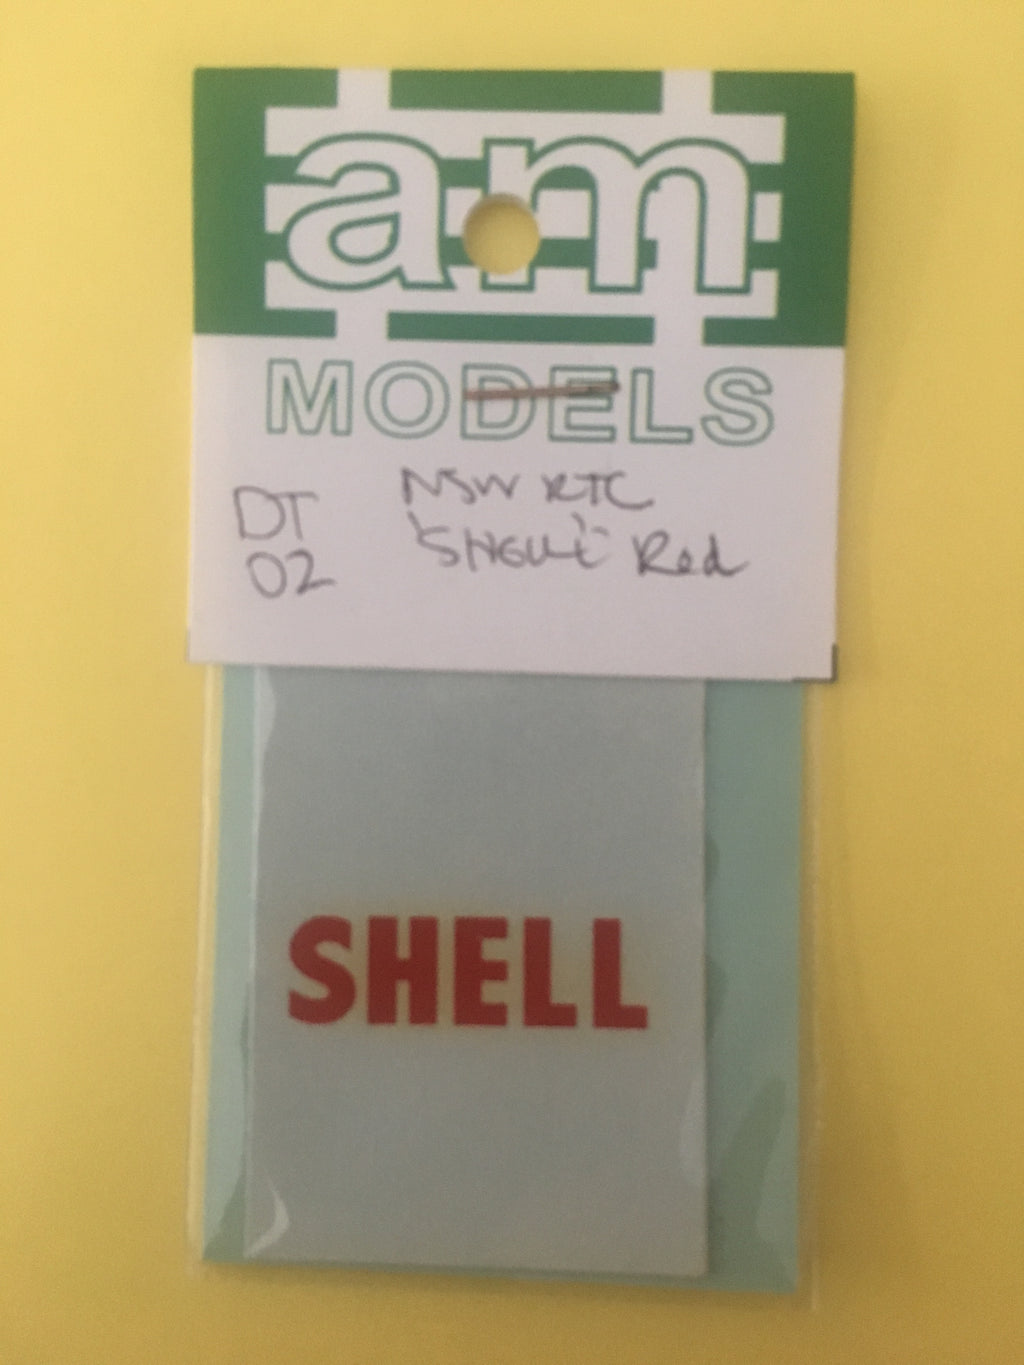 DT02 AM Models Decal: DT02 for NSW Rail Tank Cars SHELL in RED